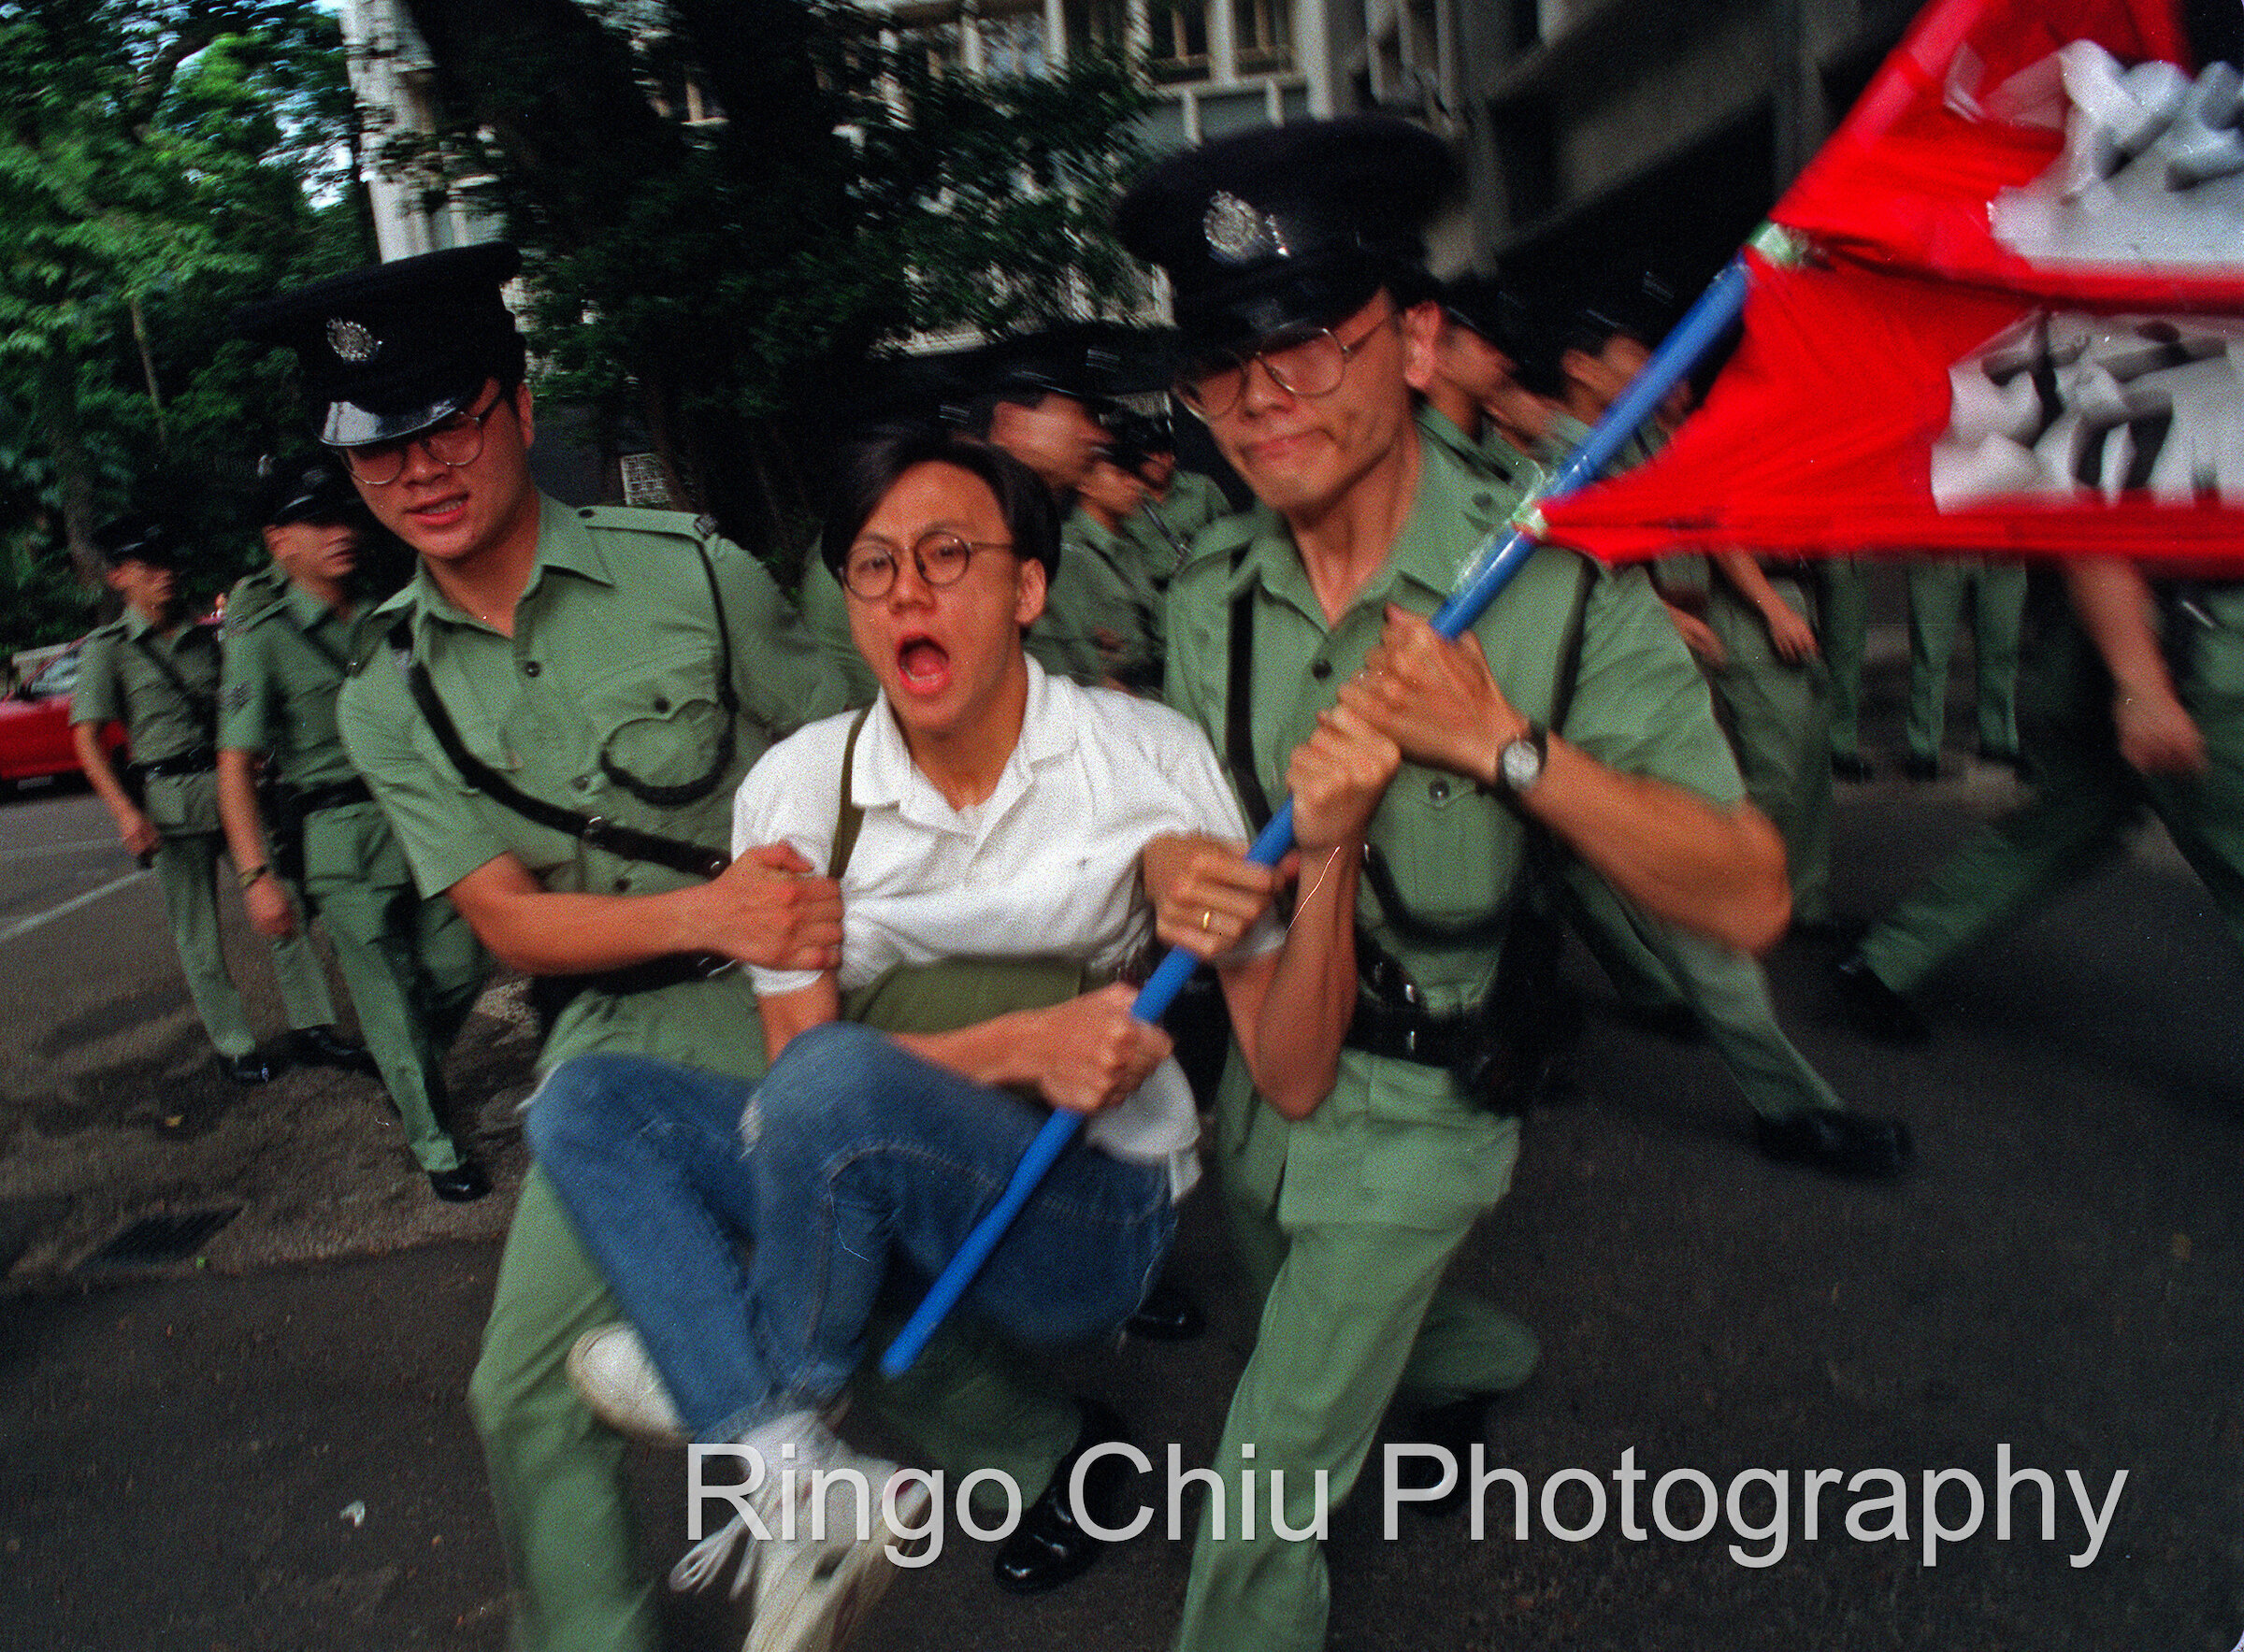  Hong Kong police officers carry a protestor during a student sit in protest blocking the entrance of the government building in Hong Kong. (1992) 